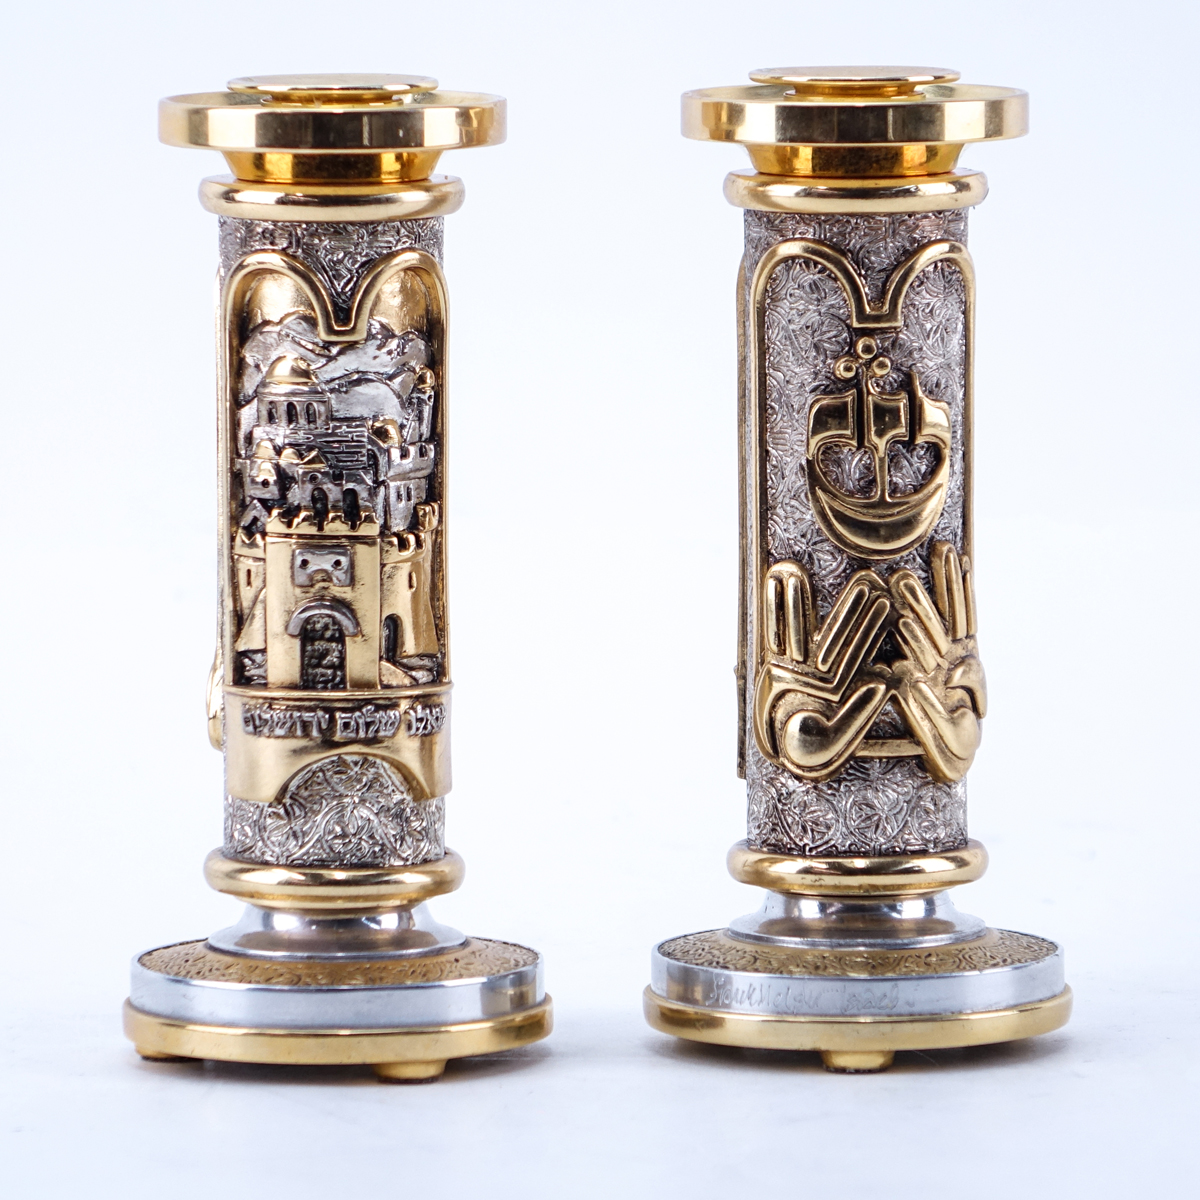 Pair of Frank Meisler Gilt and Silver Tone Metal Judaica Candlesticks, 20th Century. Signed.